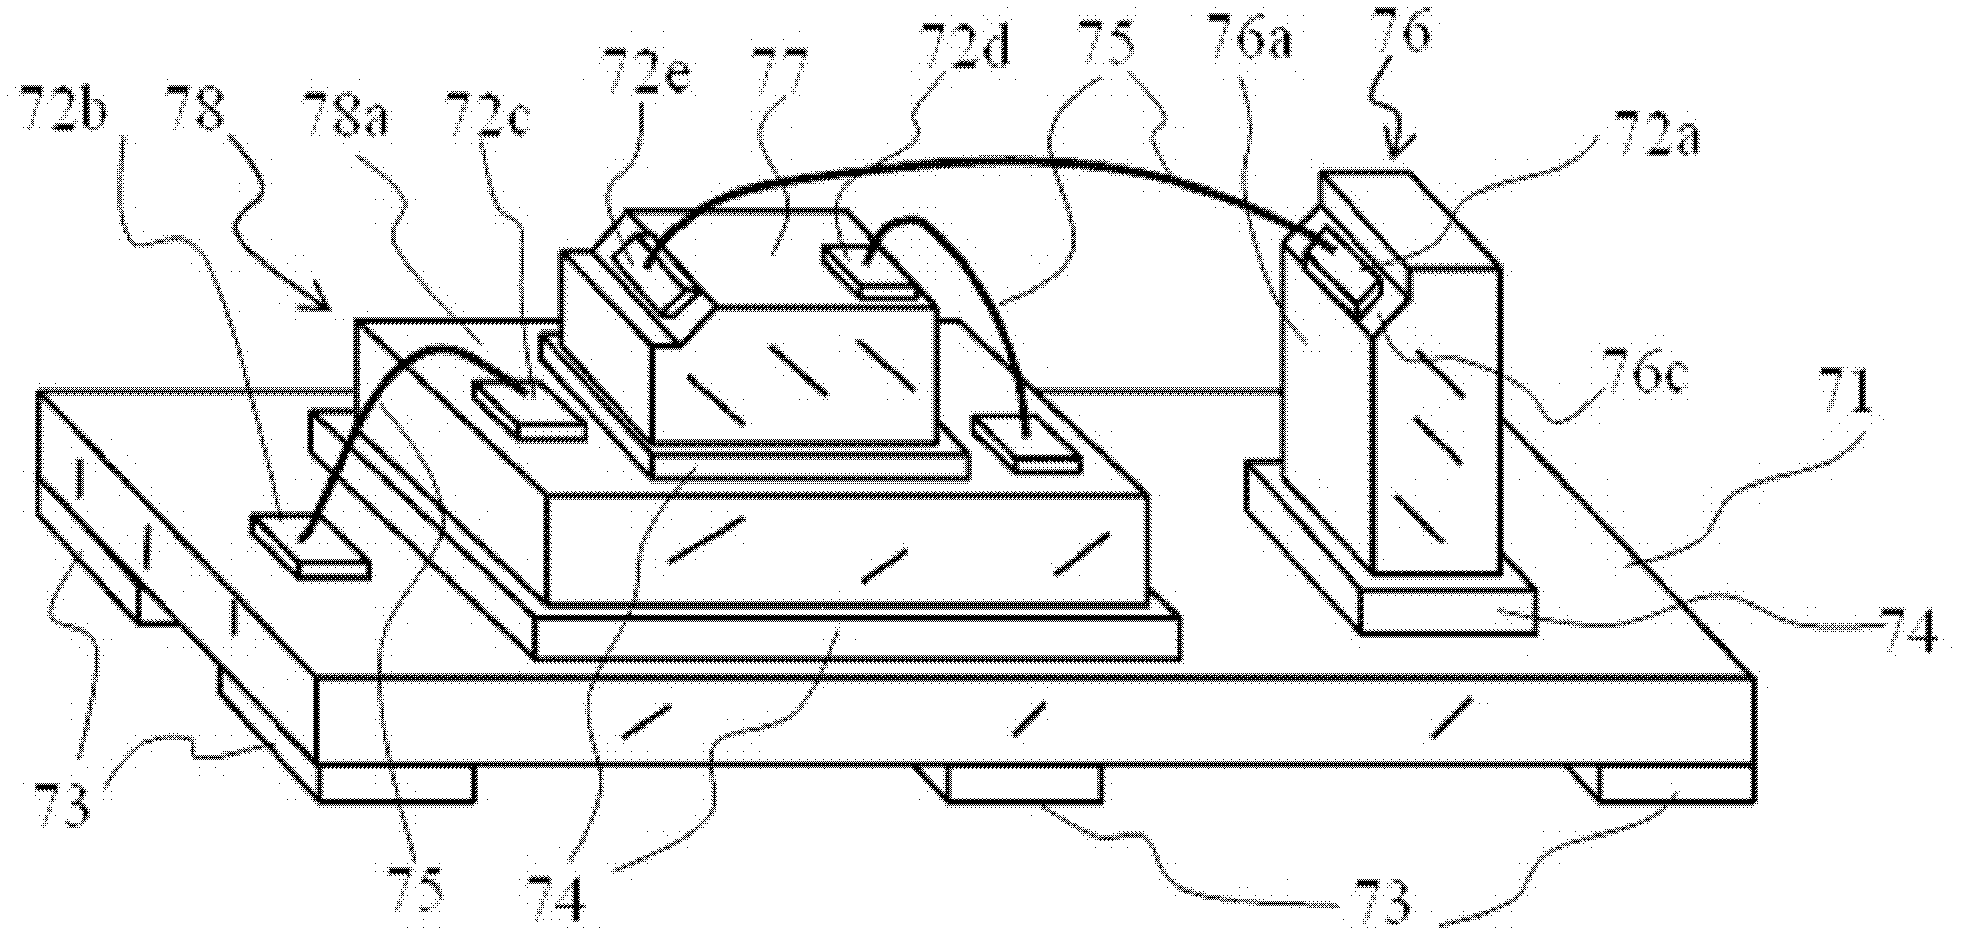 Electronic packing method of vertical chips